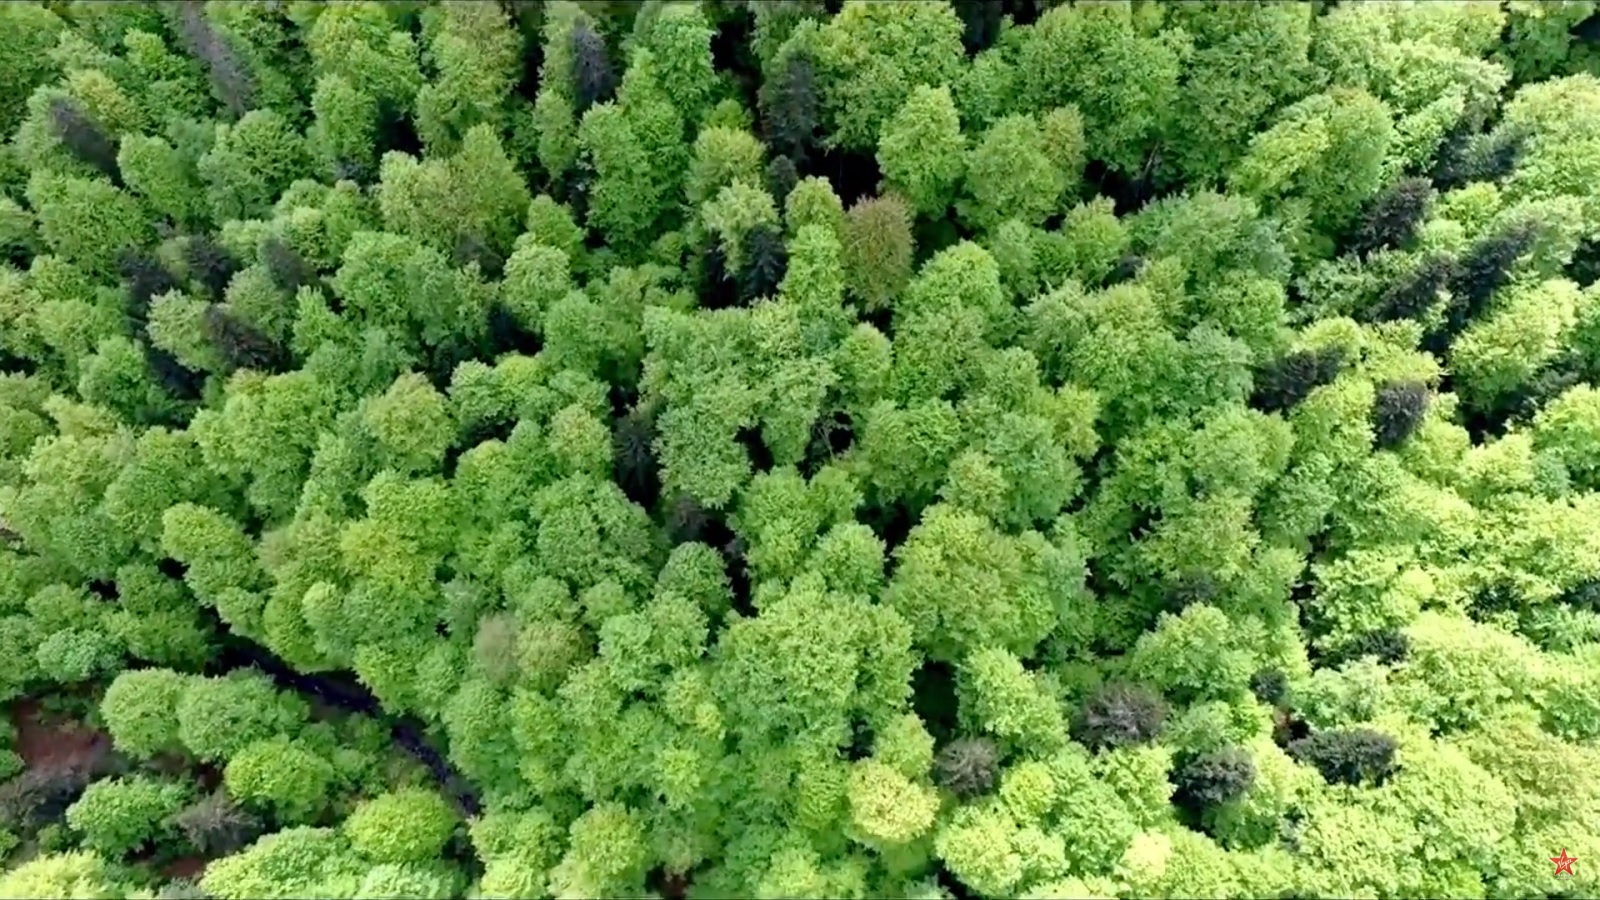 Deforestation Beat Offers Romanians a Chance to Save Virgin Forests